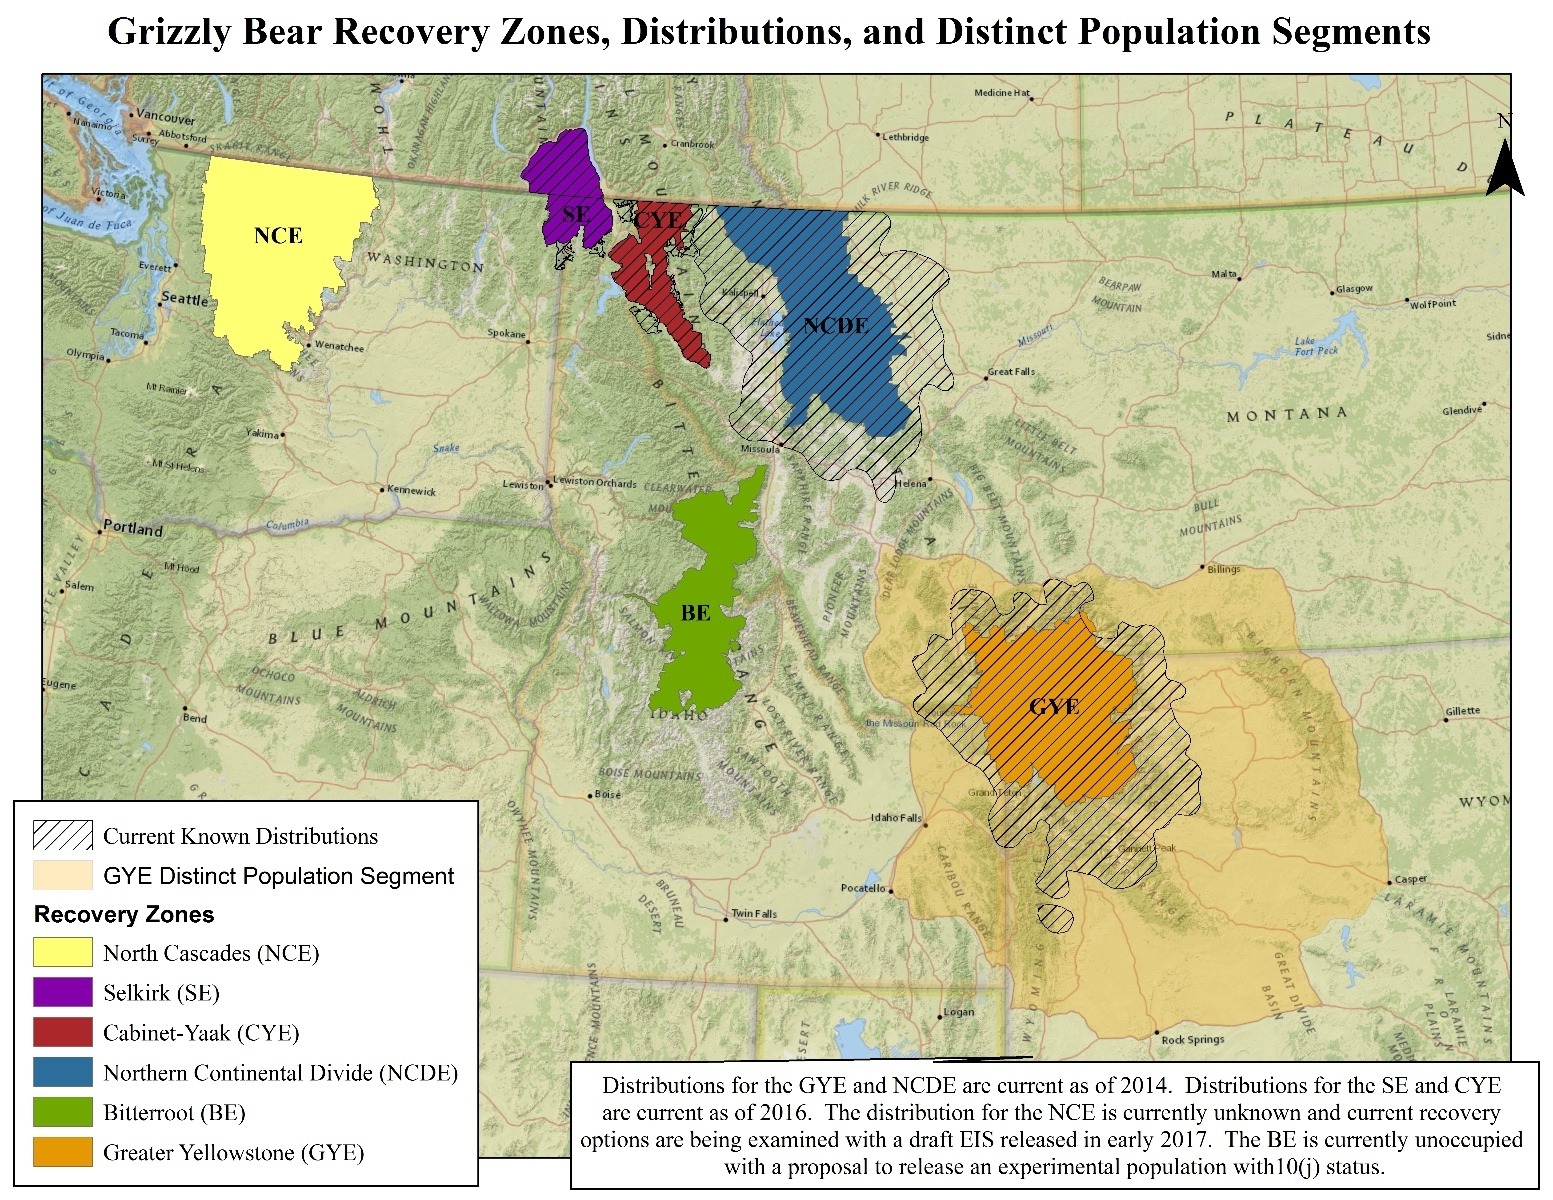 A map showing existing grizzly bear populations in the Lower 48 states.  Lance Olsen notes that communities around both the Greater Yellowstone (orange) and Northern Continental Divide (blue) are among the fastest growing in the country. The best hope for achieving real bear recovery is having a grizzly 